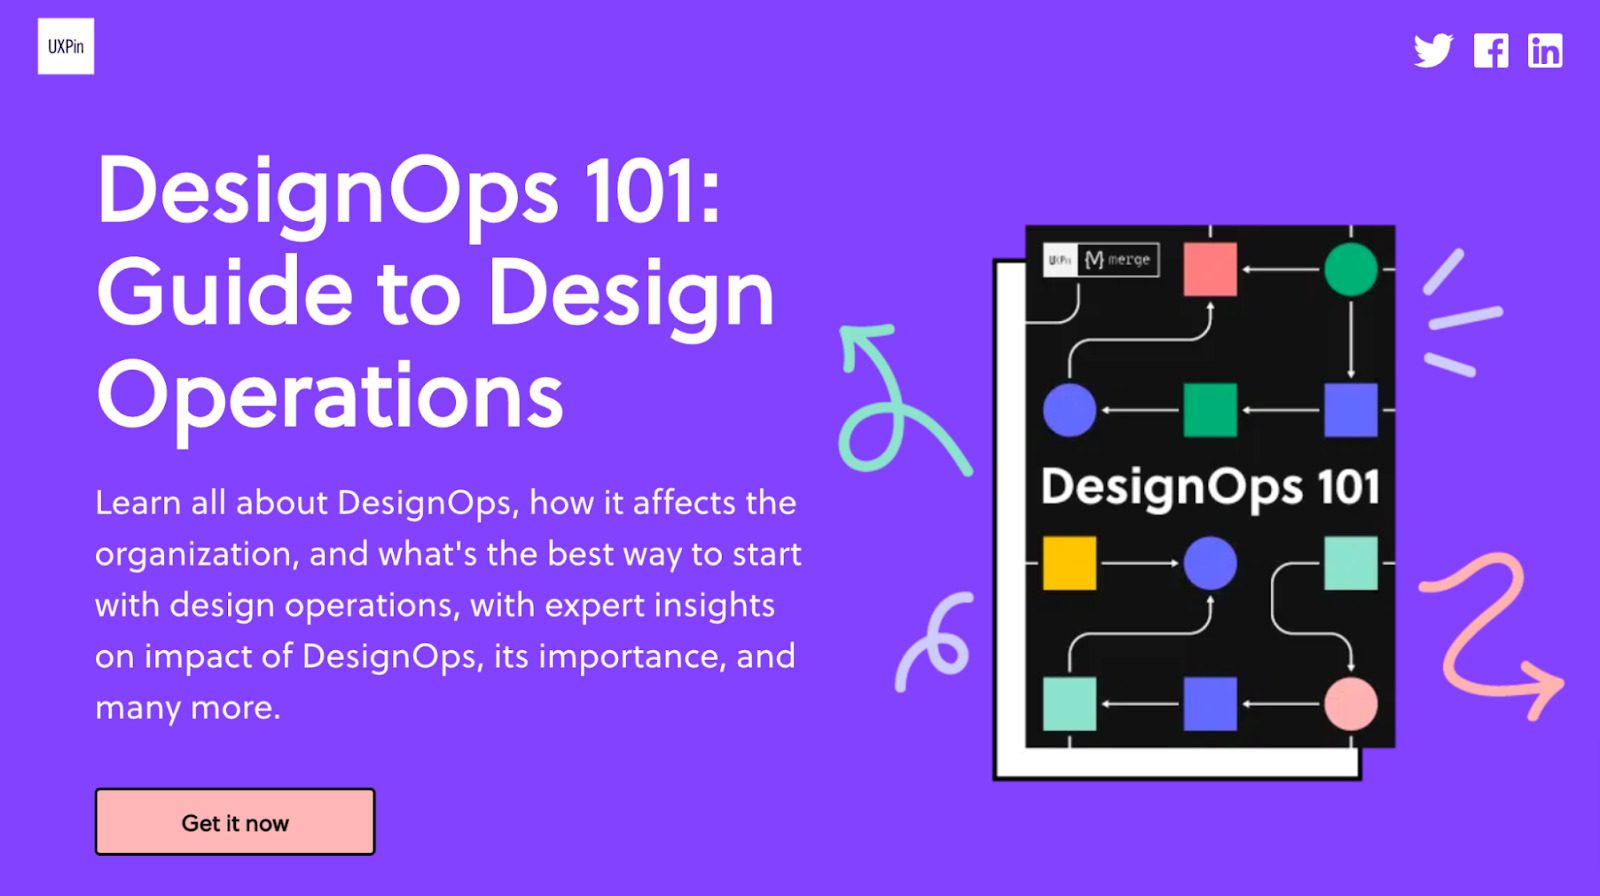 Write-up about DesignOps book. Below that, button to click through and get the book